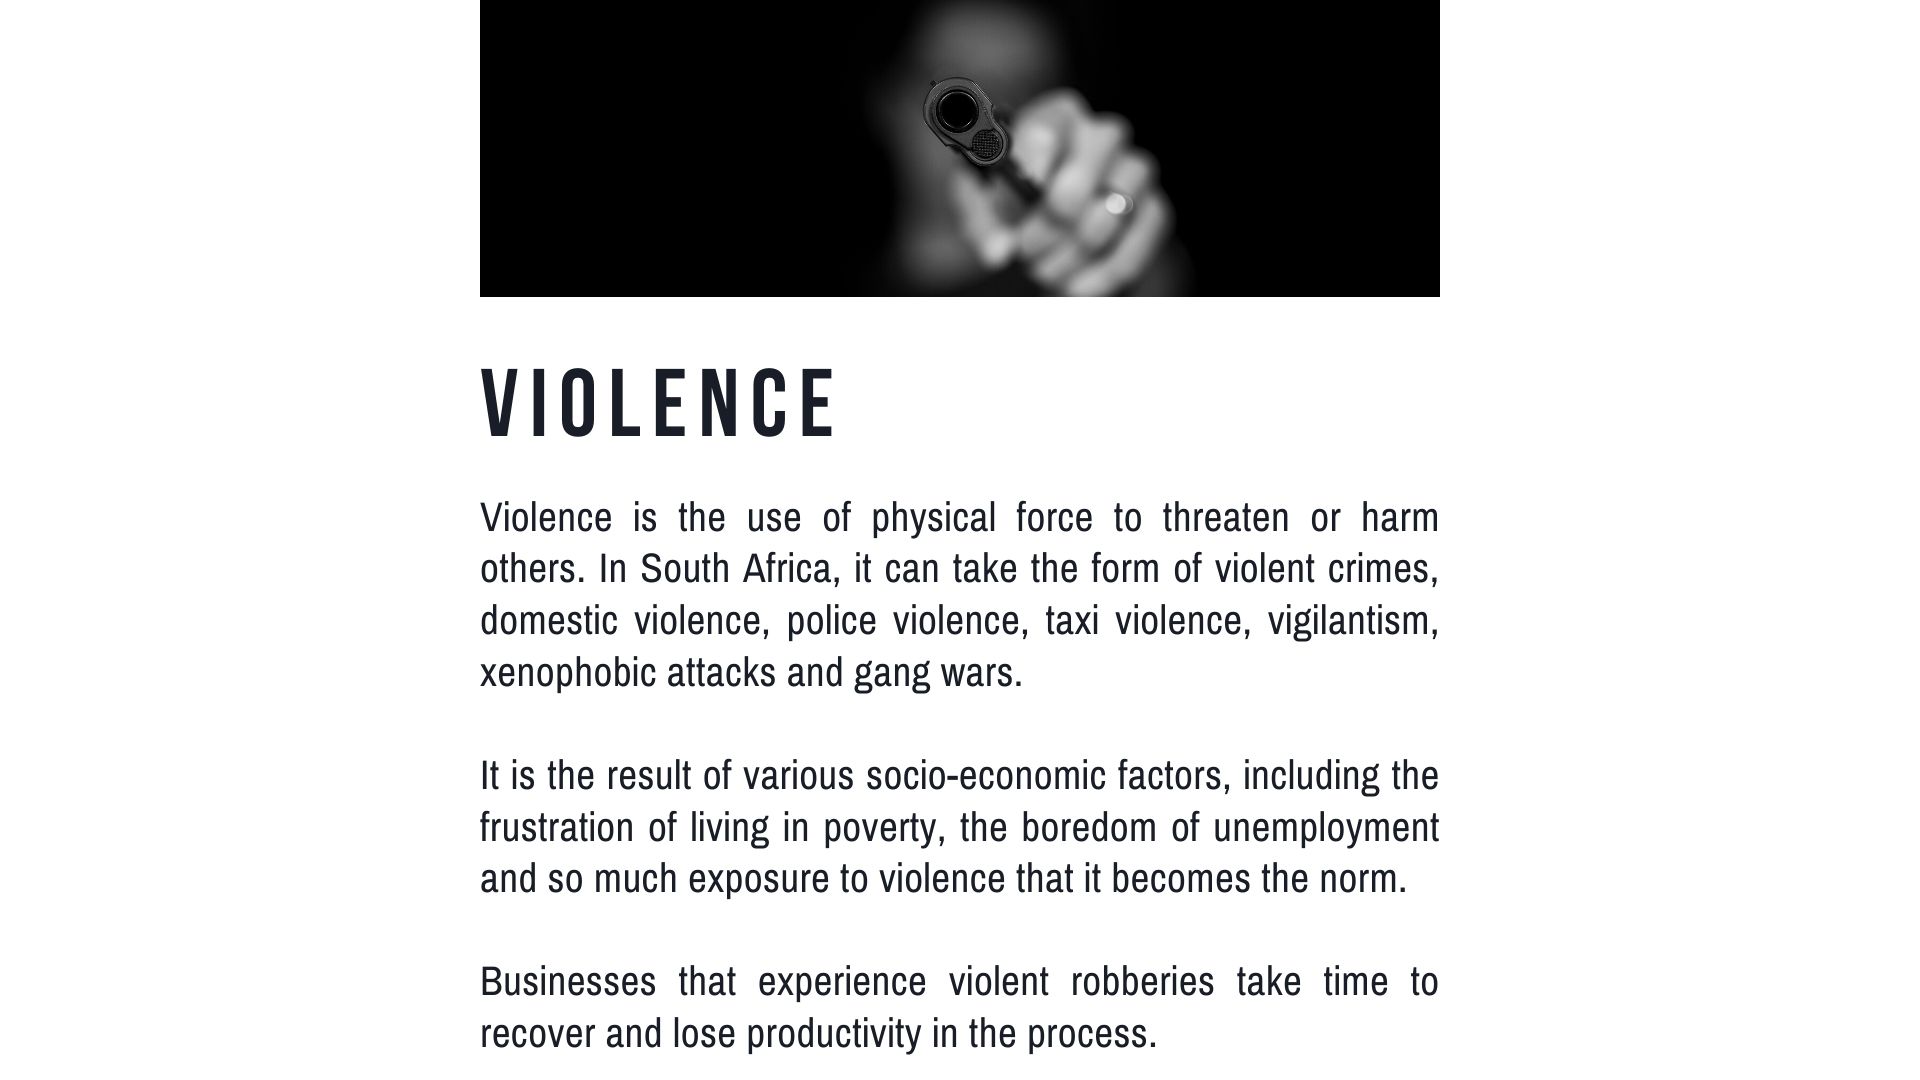 List of South African Contemporary Socio-Economic Issues - Definition and explanation of violence